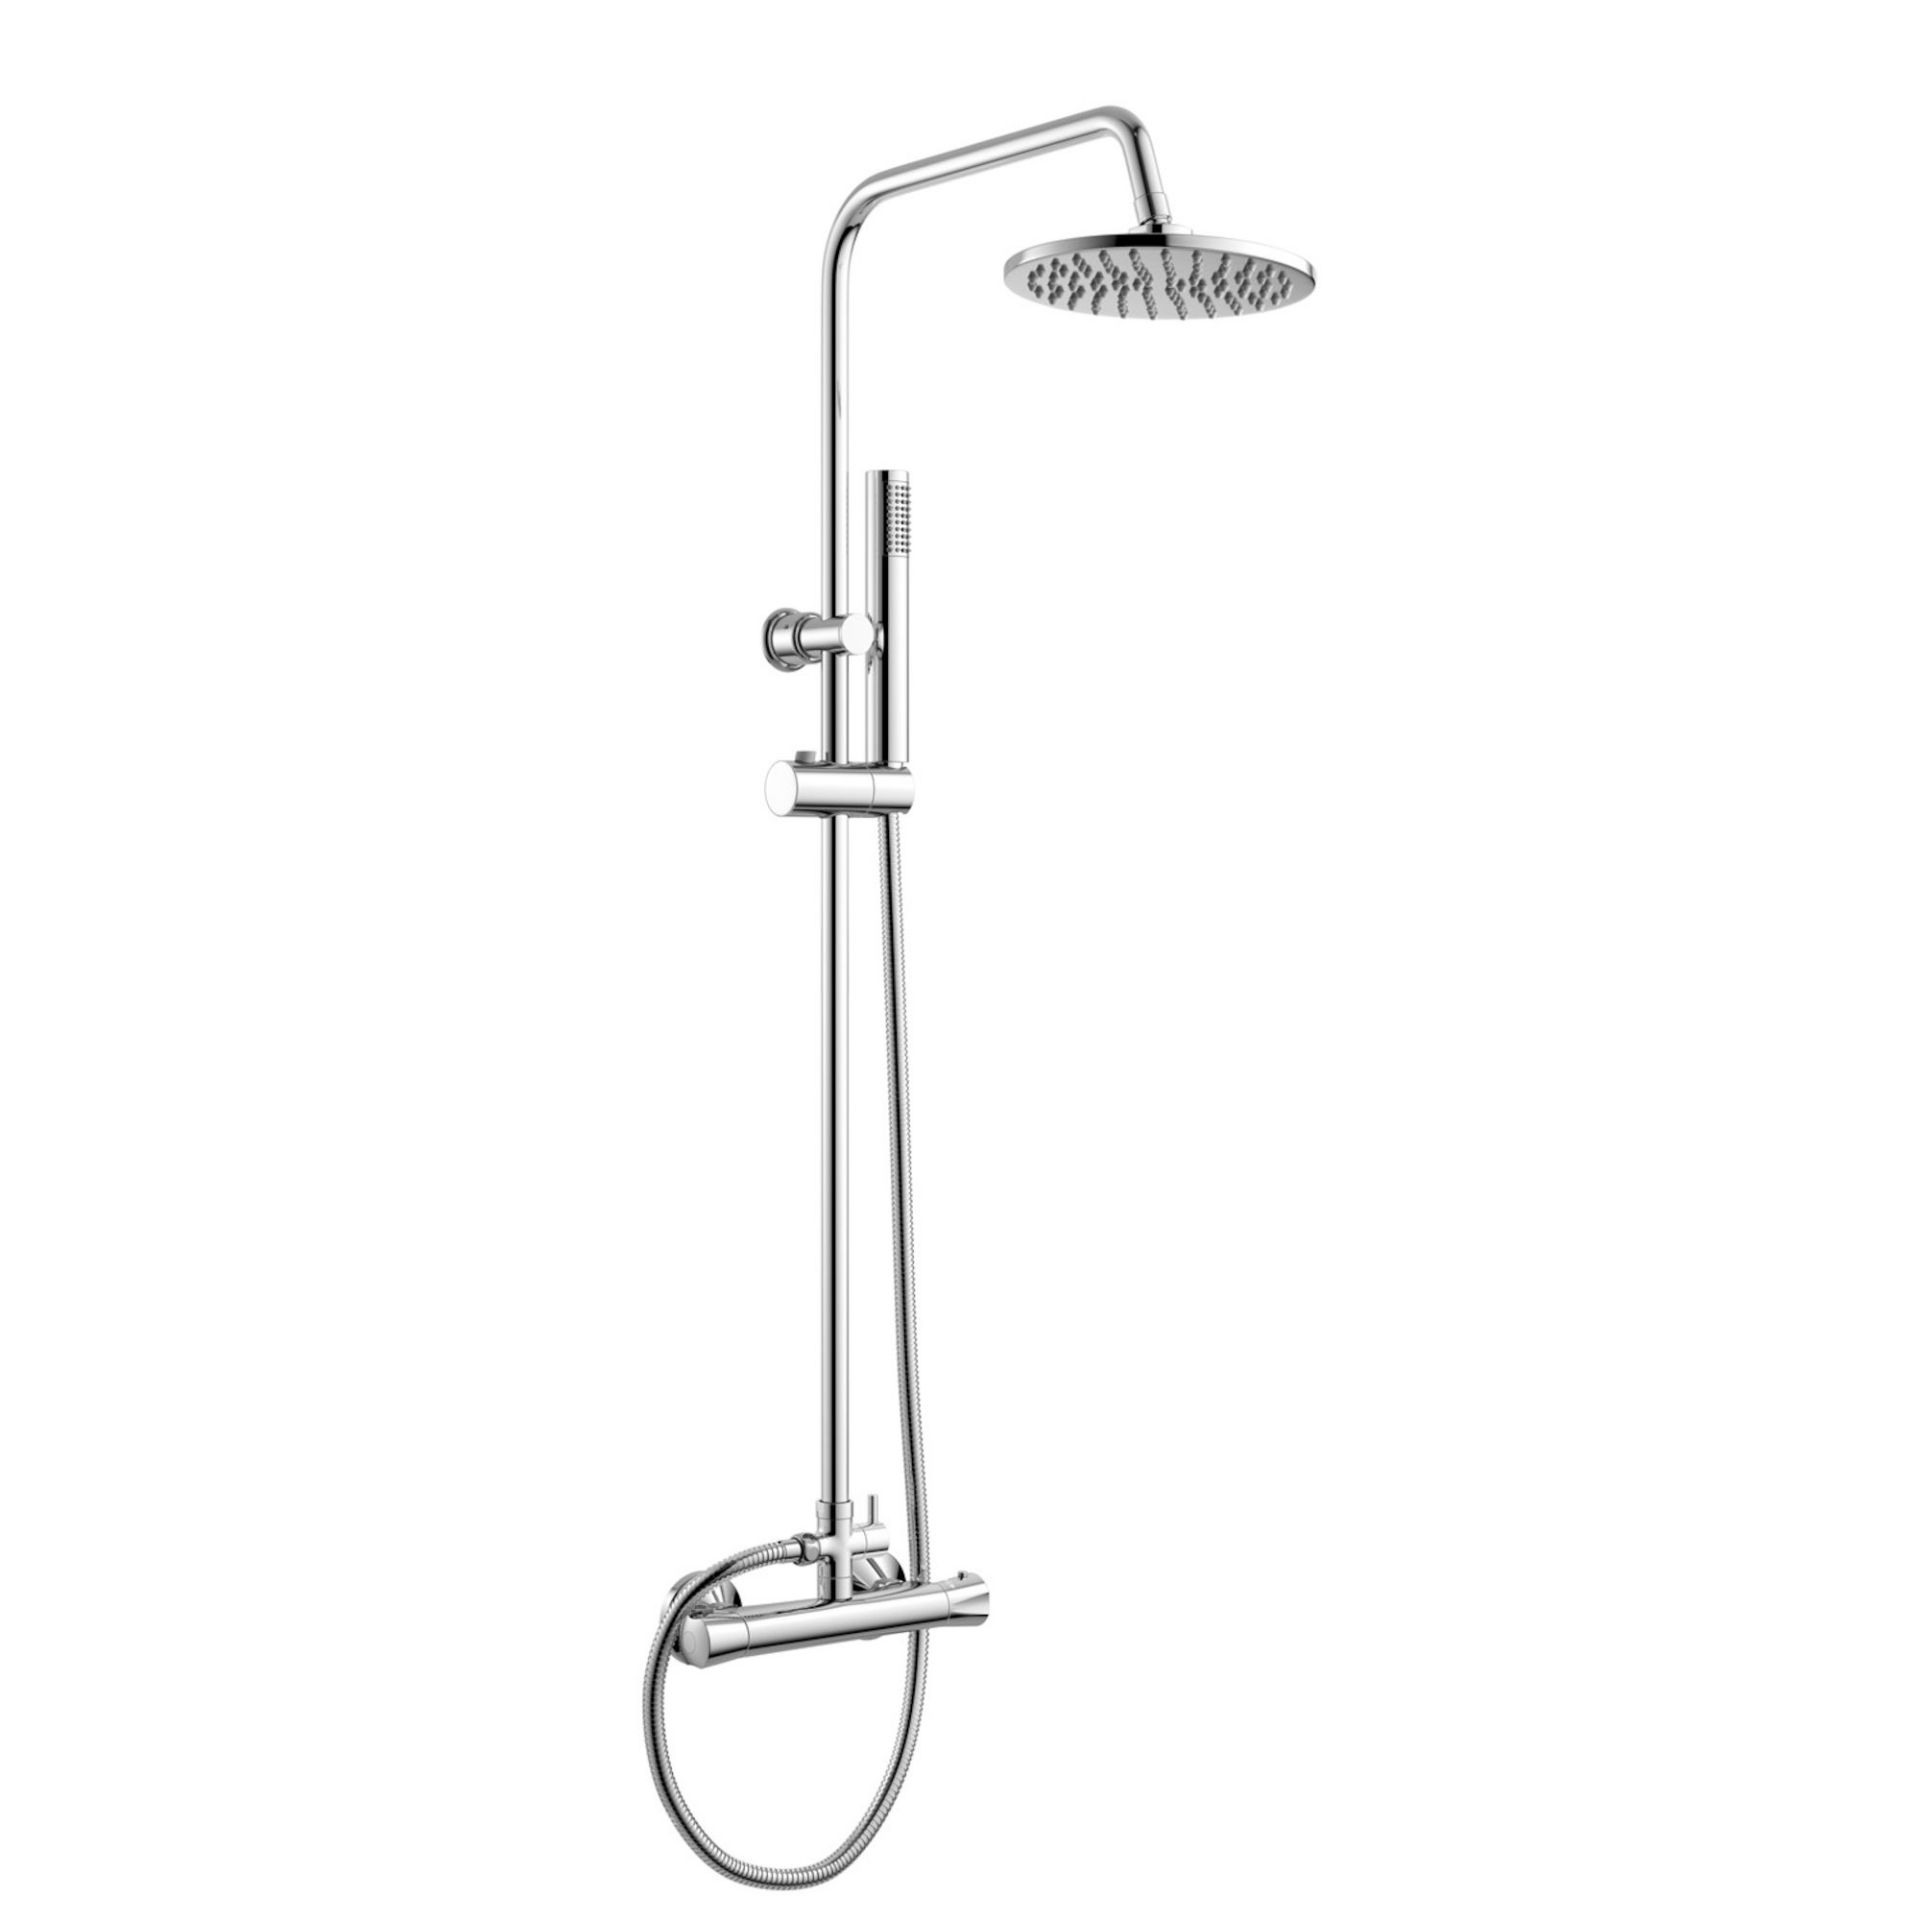 (SM3) Round Exposed Thermostatic Shower Kit & Head. Shower head features a tilt action for maximum